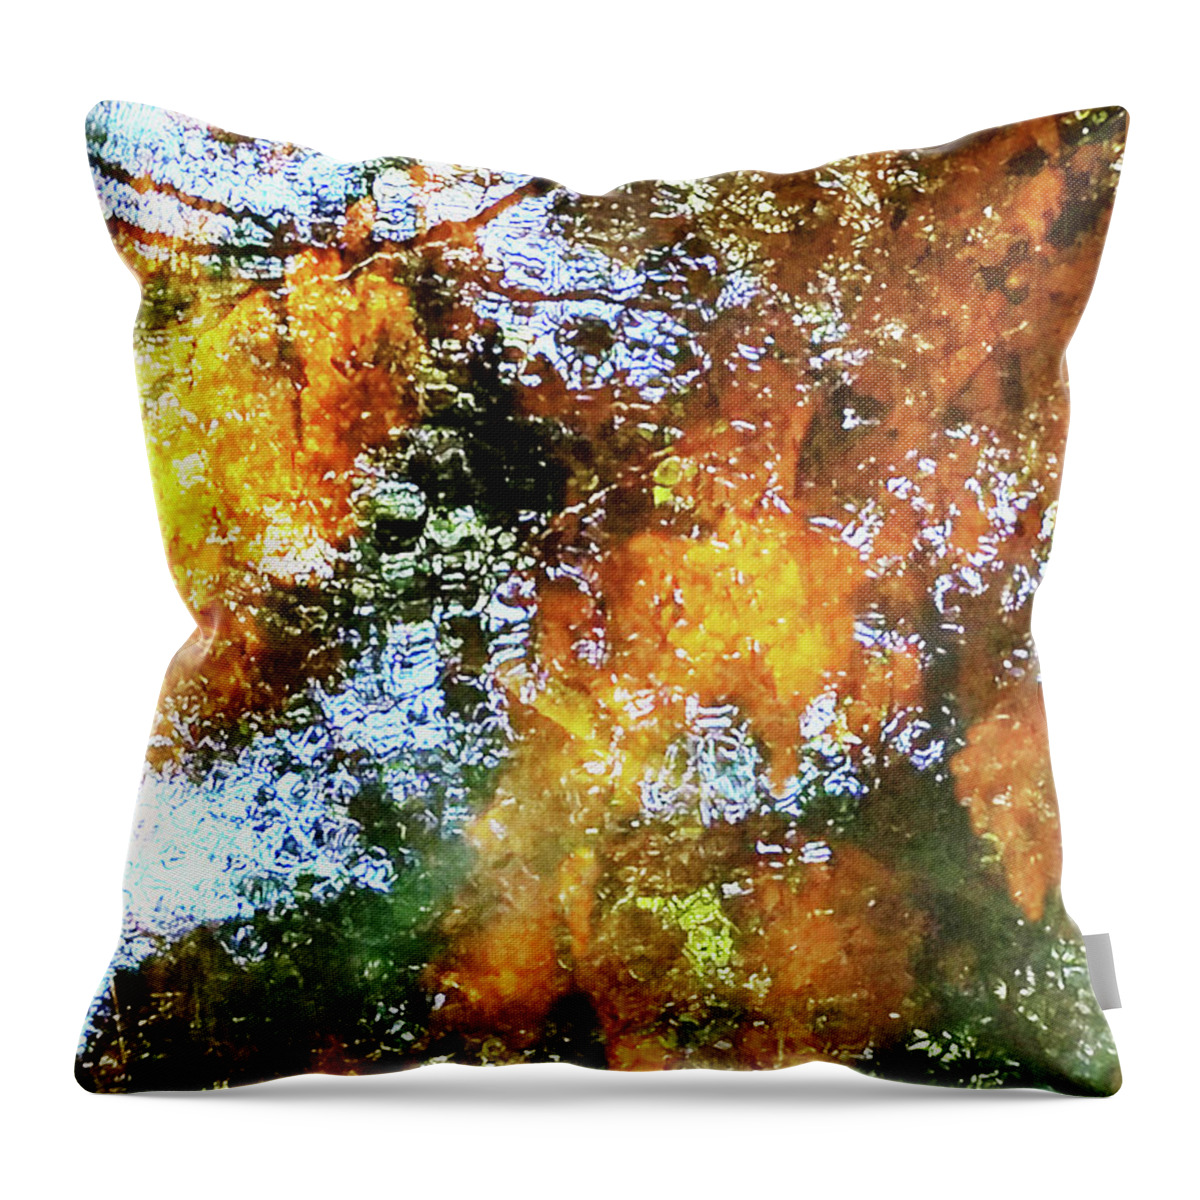 Landscape Throw Pillow featuring the painting Overhang by Sharon Williams Eng